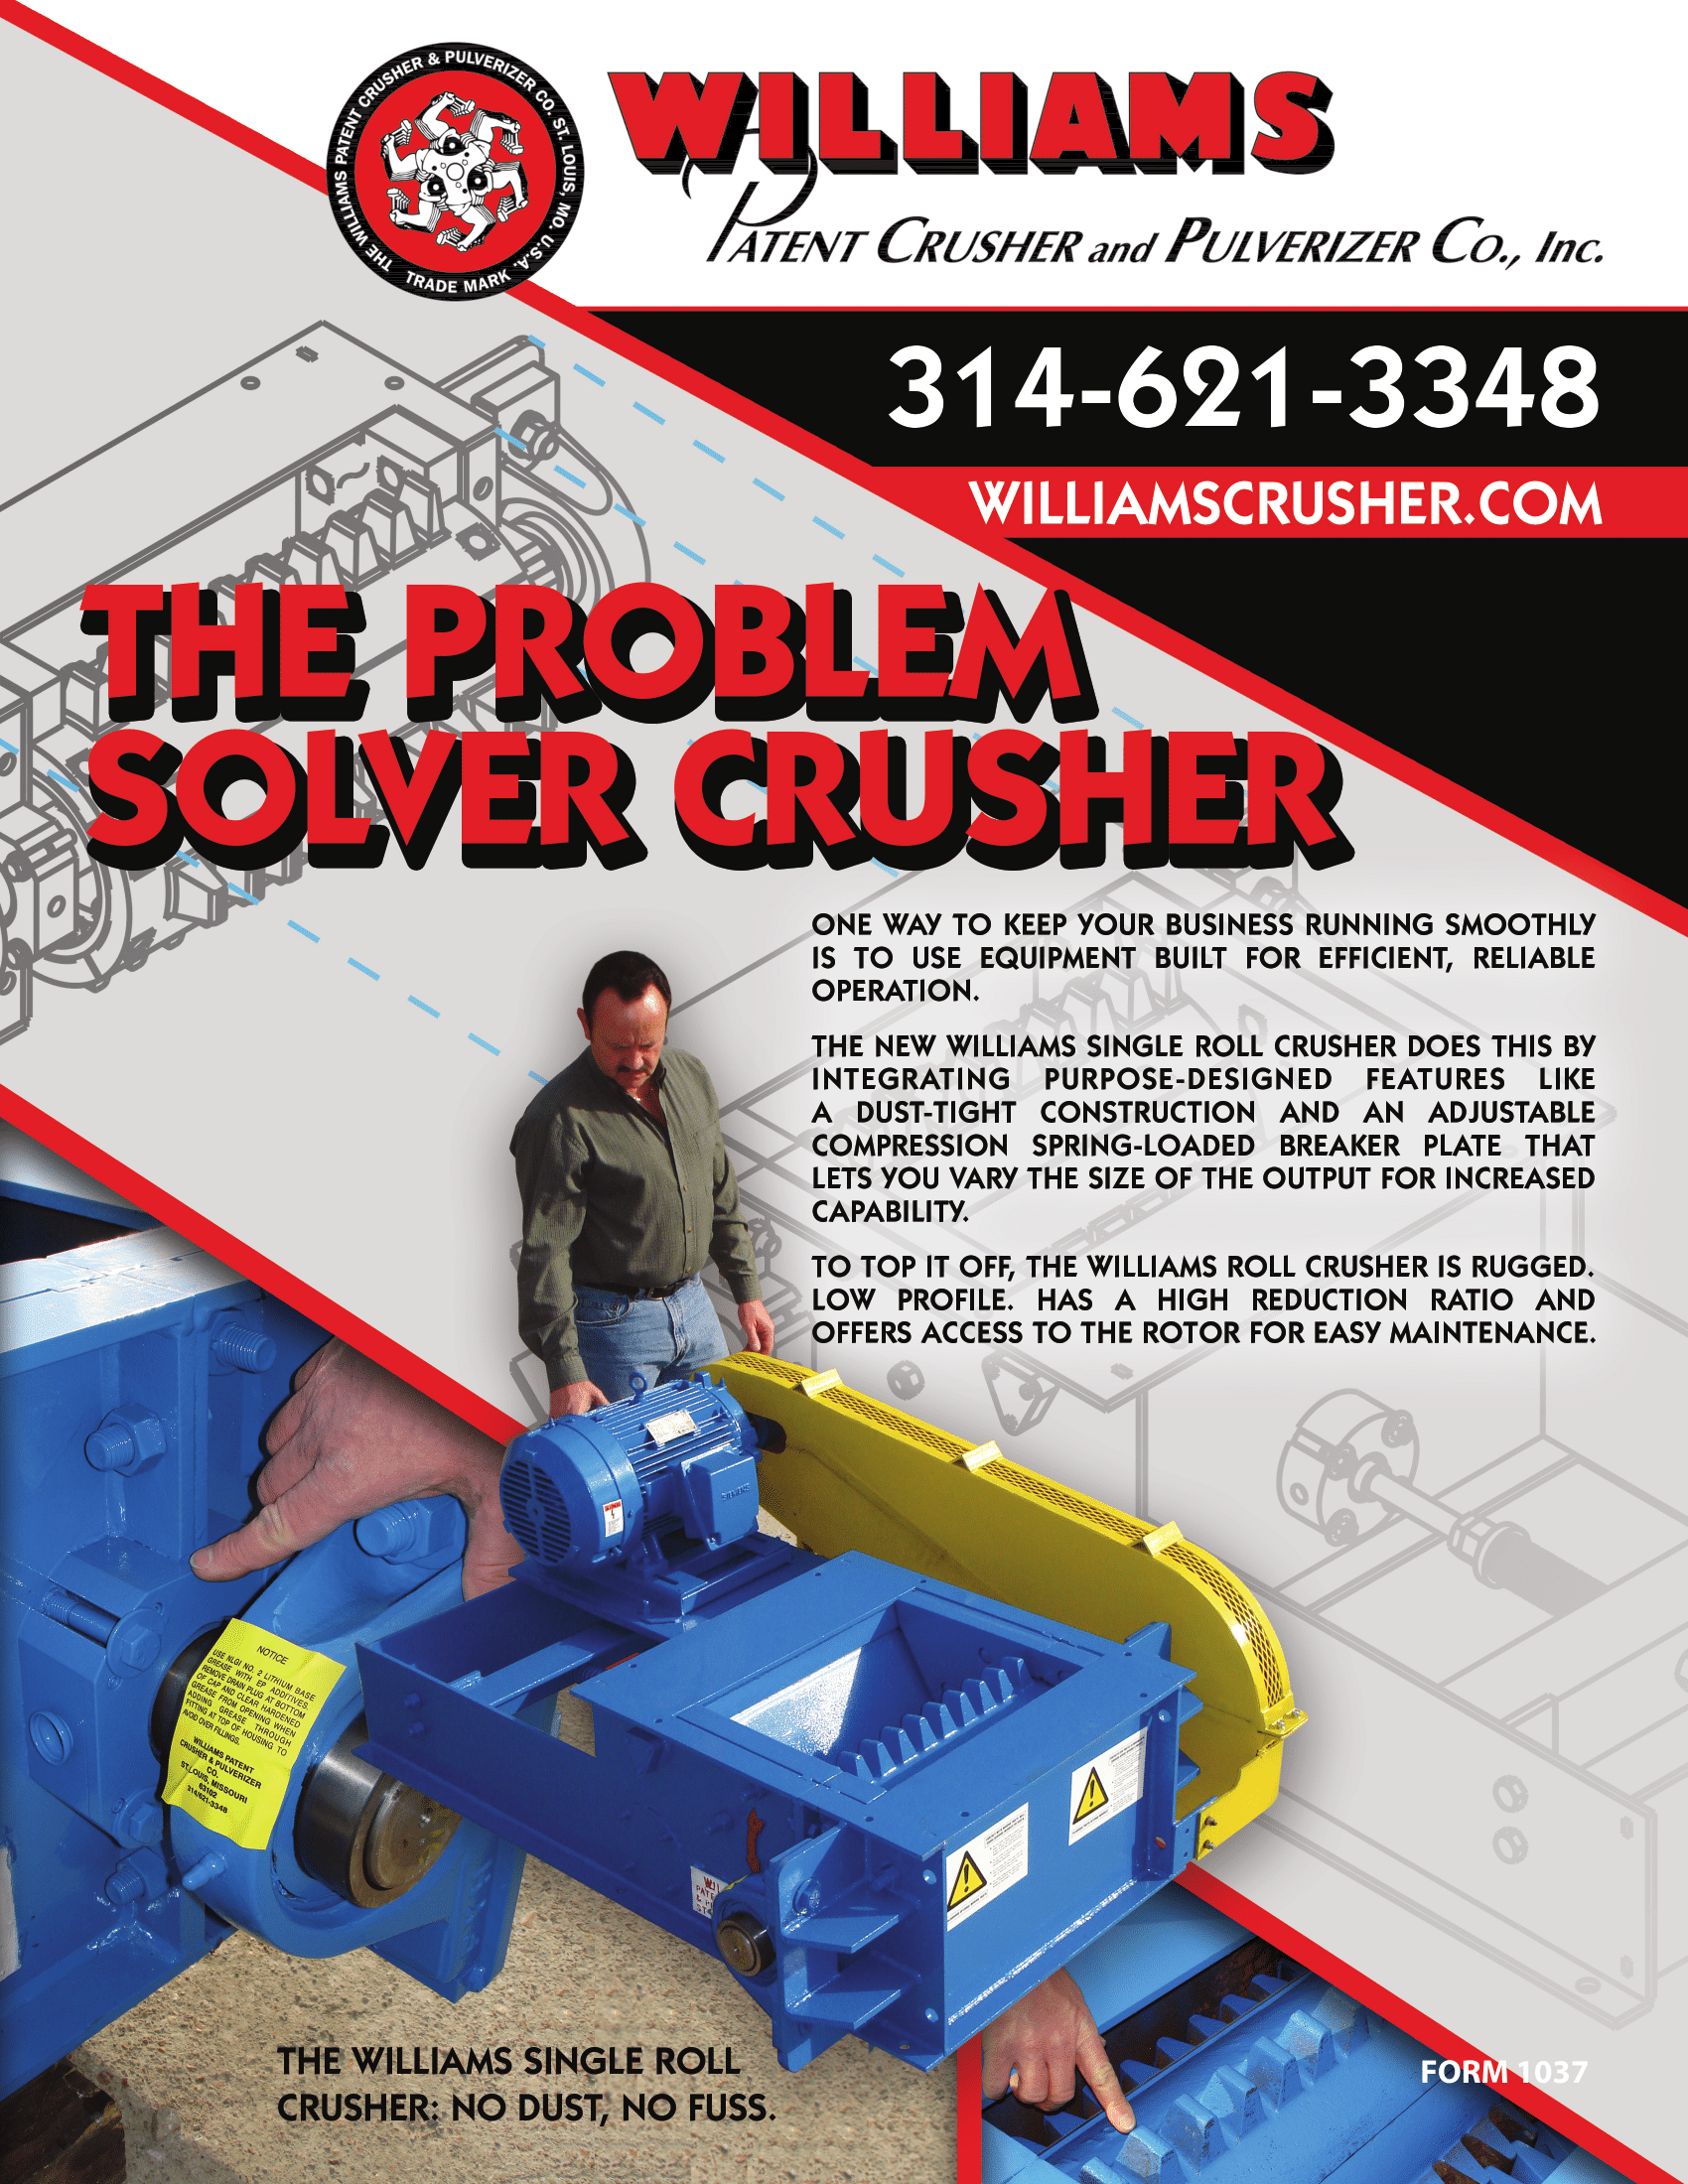 The Problem Solver Roller Crusher Flyer - Williams Patent Crusher